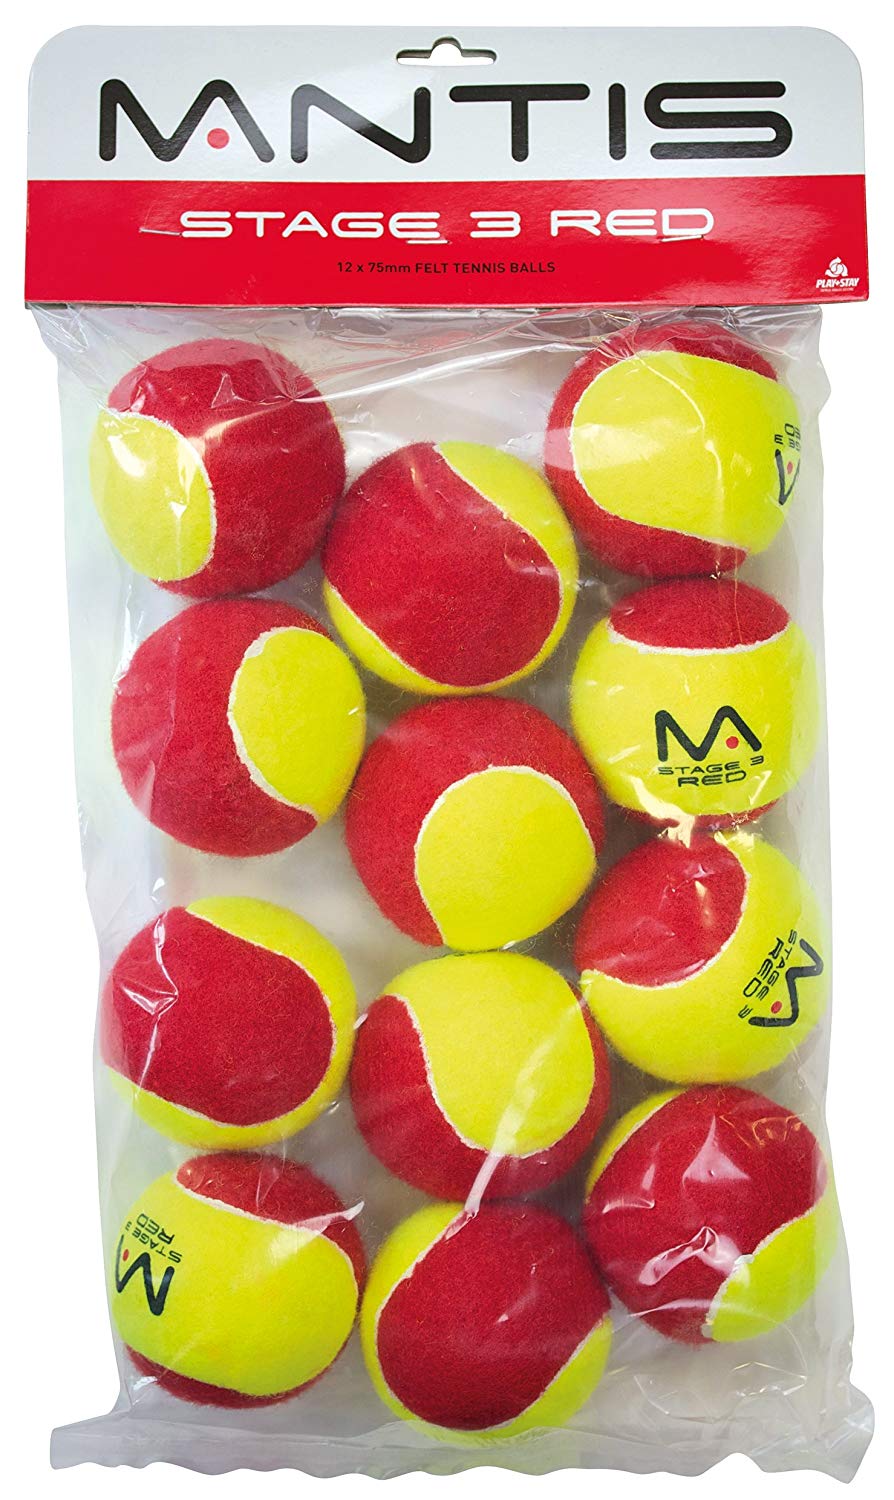 Red Ball with X Logo - Mantis Stage 3 Stage Tennis Ball (Pack of 12) - Red: Amazon.co.uk ...